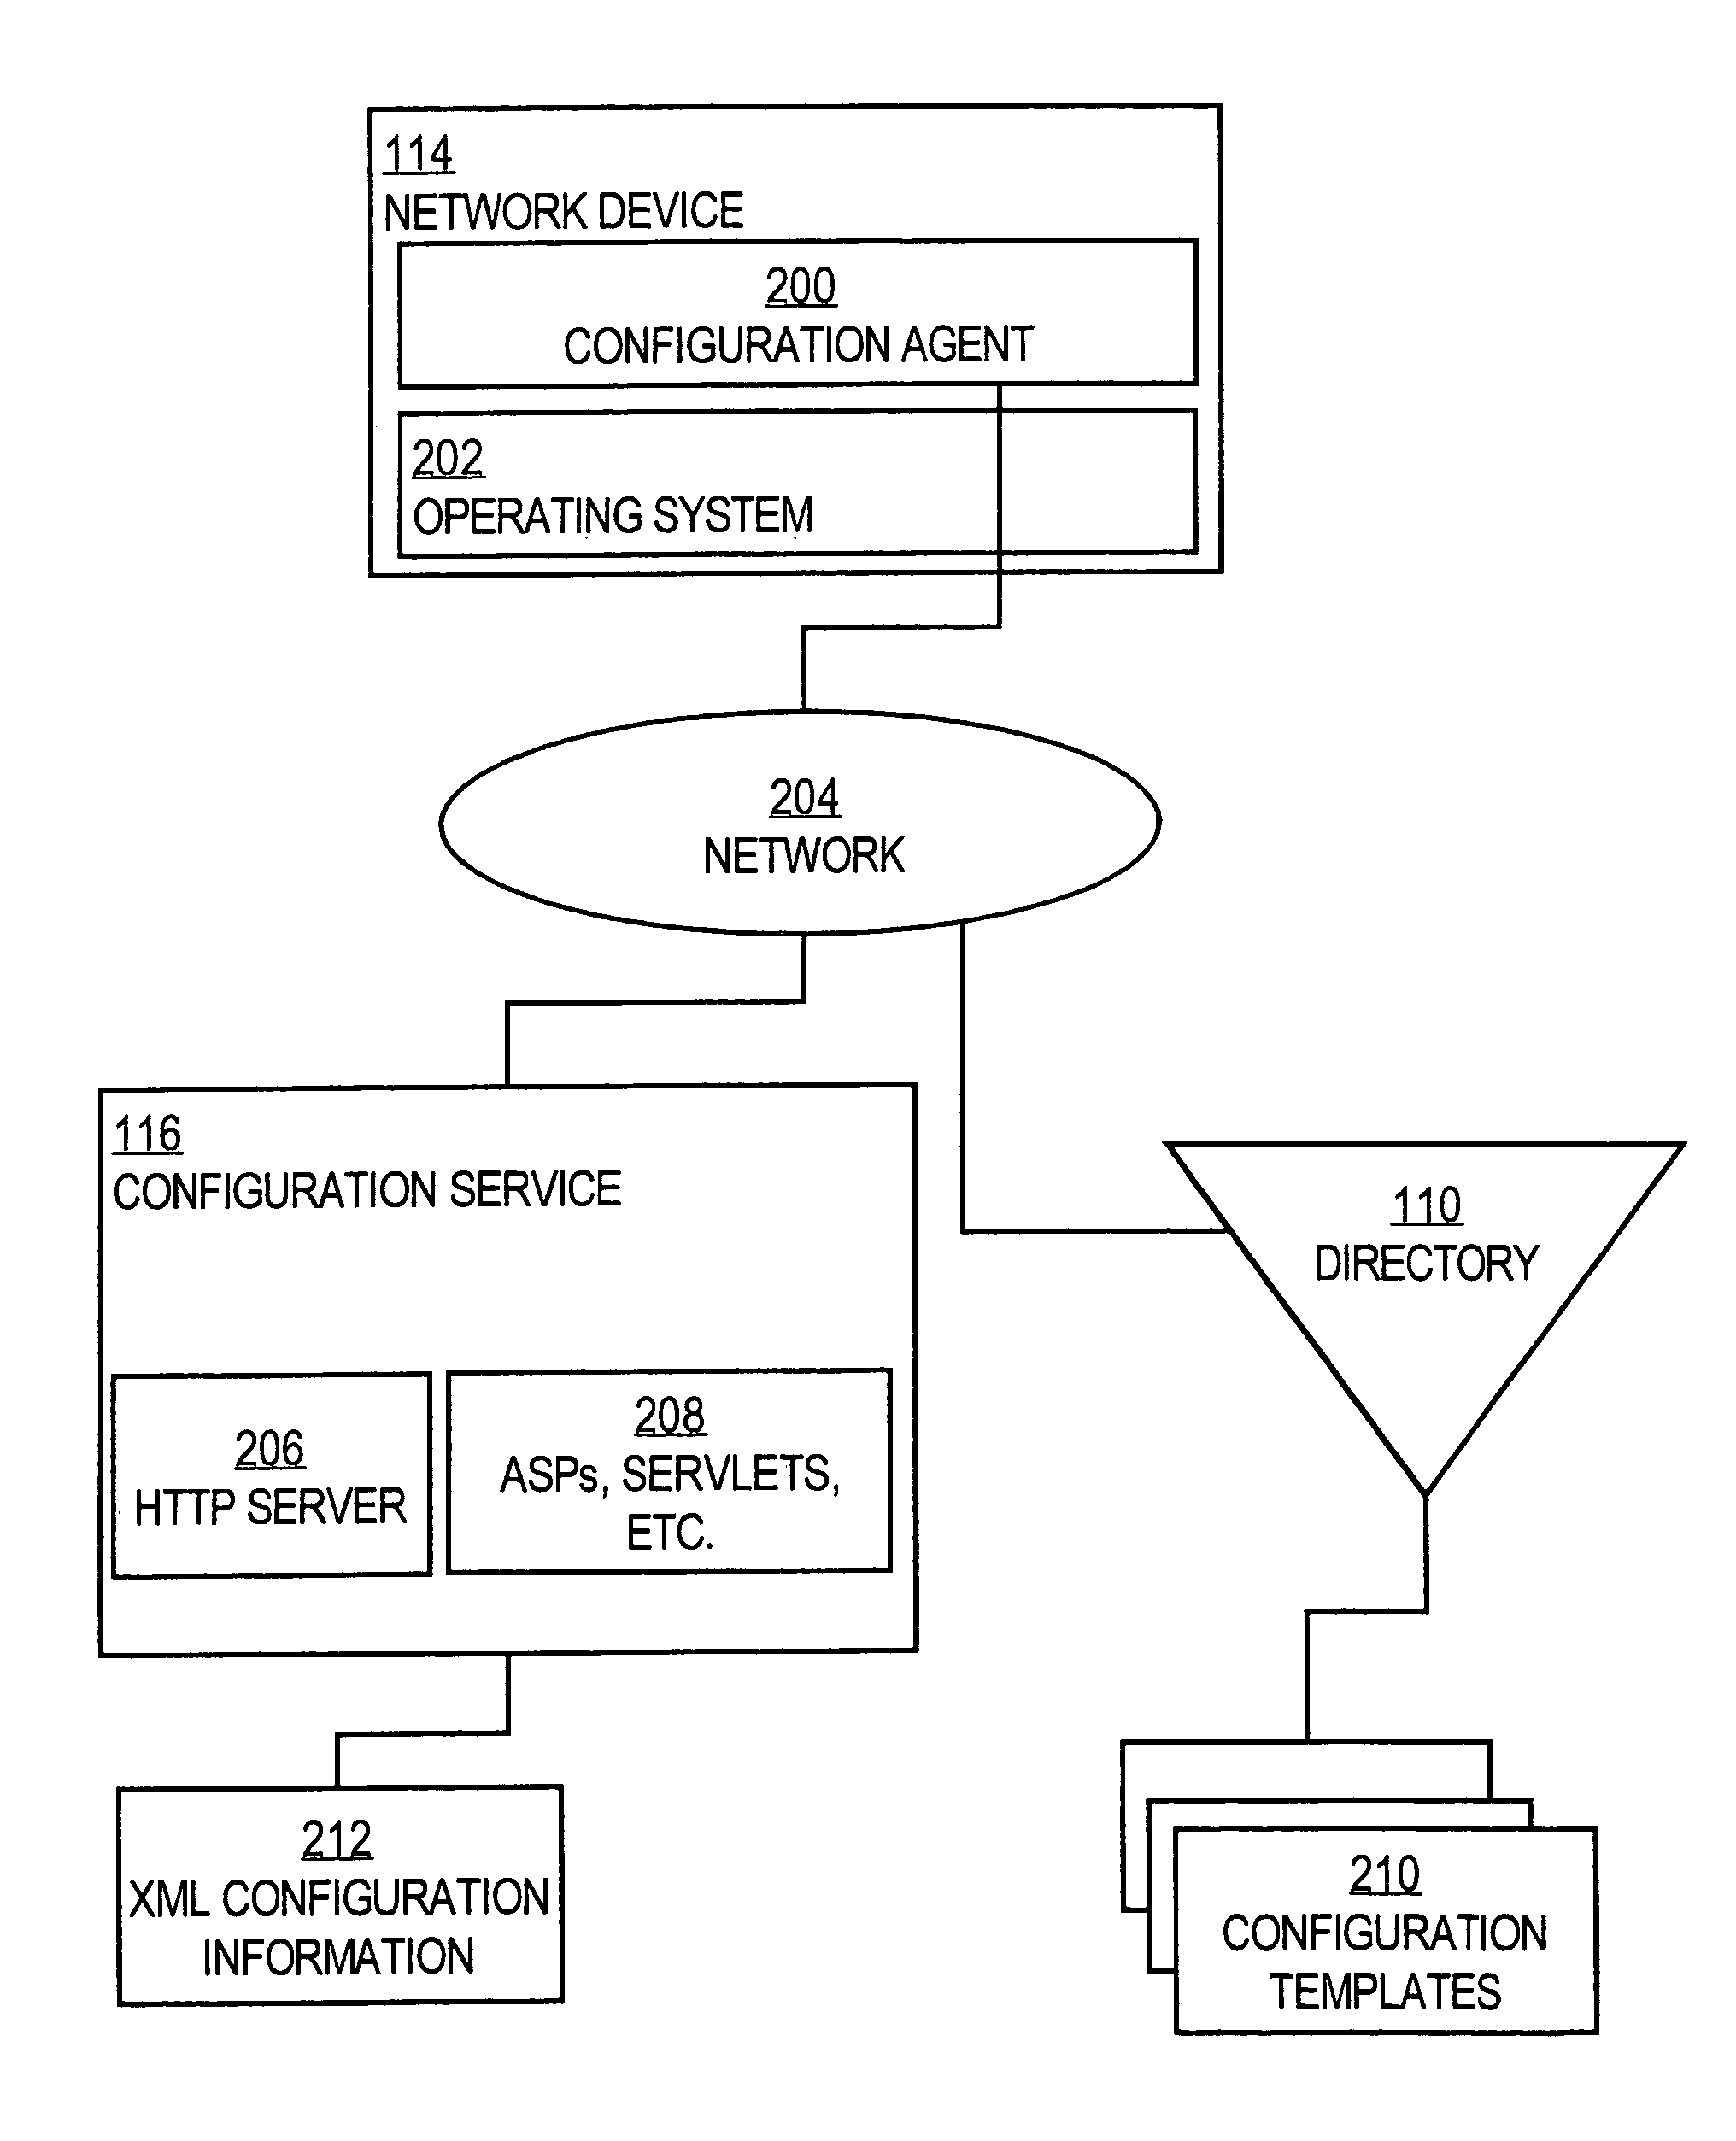 Method and apparatus for provisioning network devices using instructions in extensible markup language